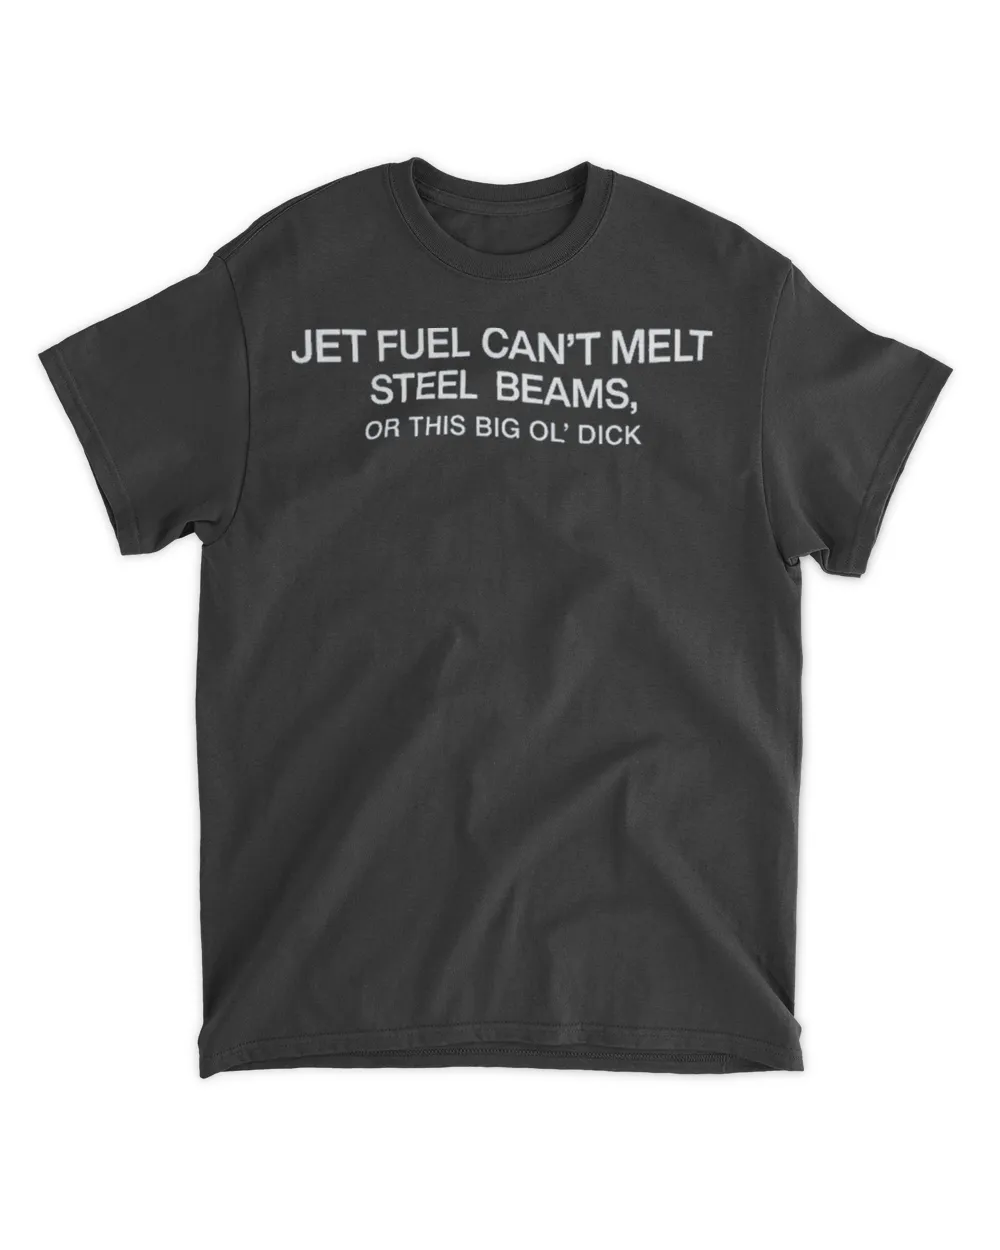 Jet fuel can't melt steel beams or this big ol' dick shirt